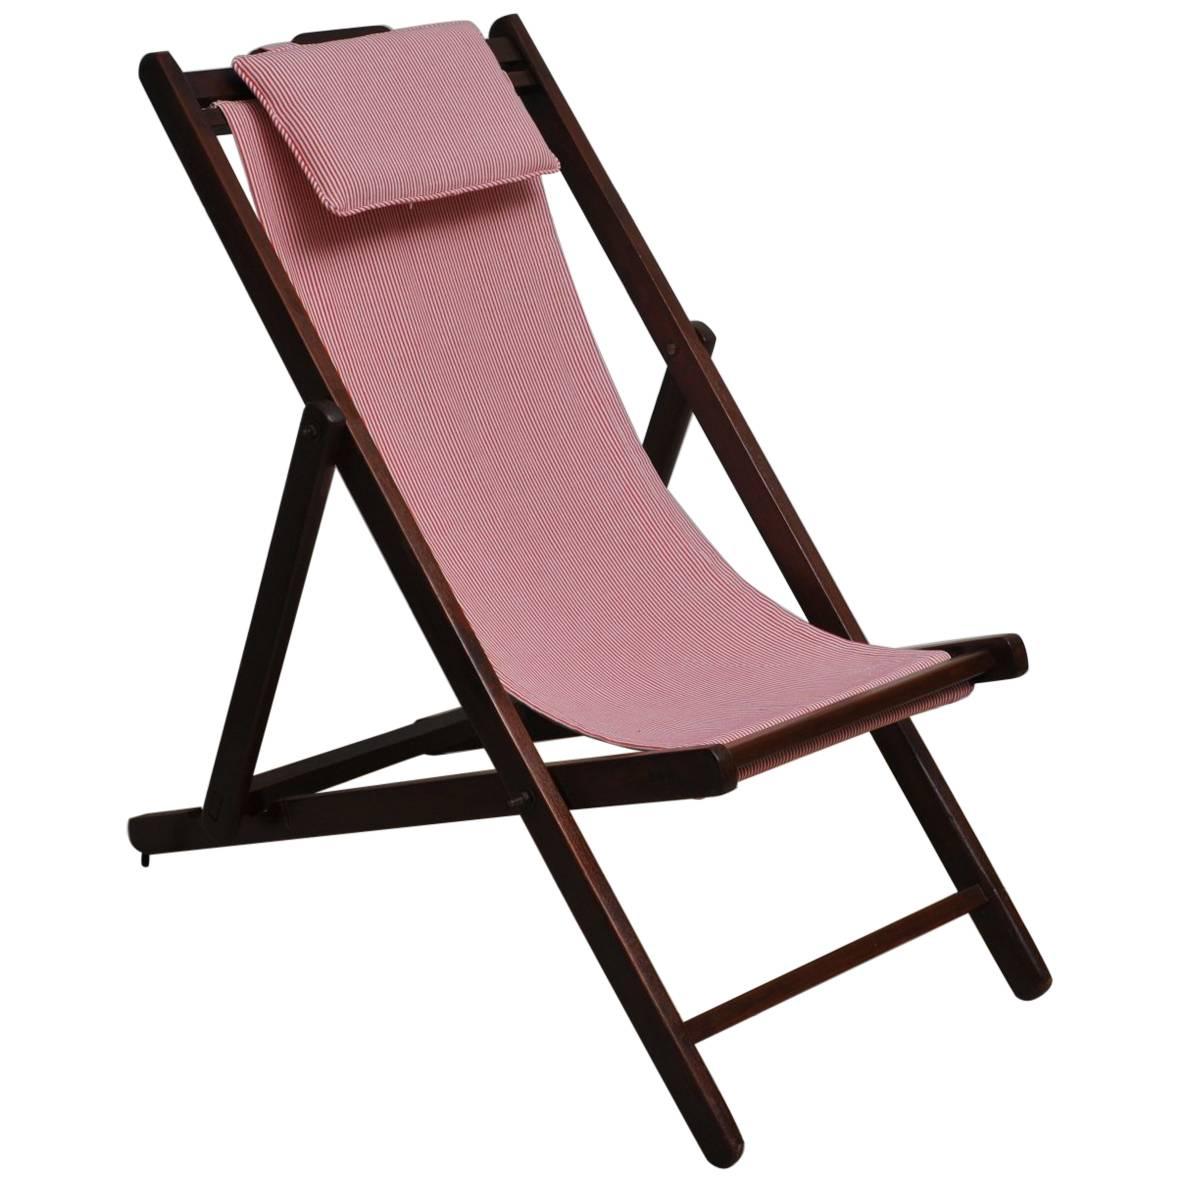 Folding and Adjustable Sling-Back Lounge Chair, 1940s British Campaign